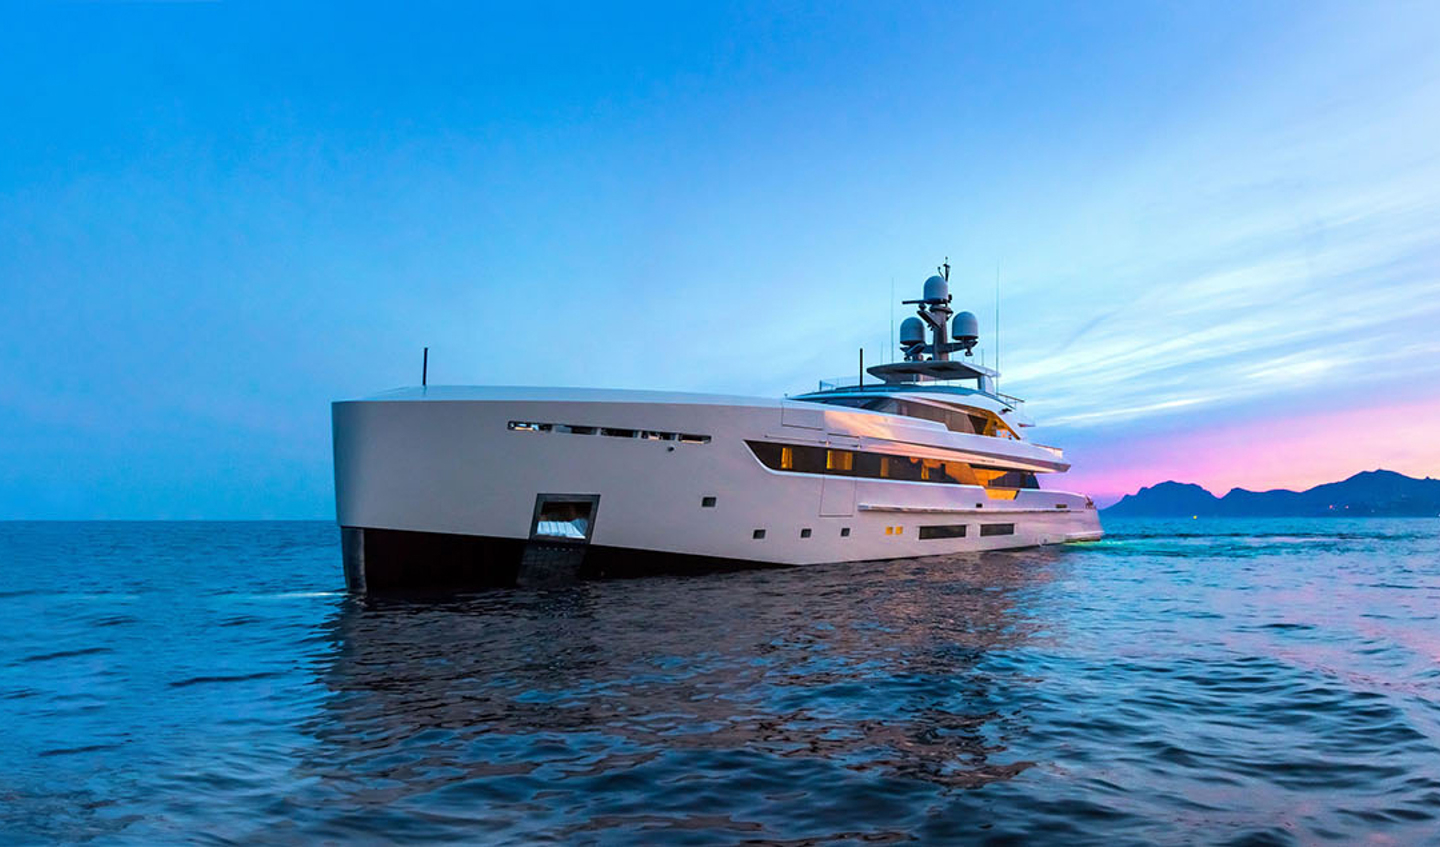 Front side view of luxury super yacht in the ocean at sunset with mountains in the background.